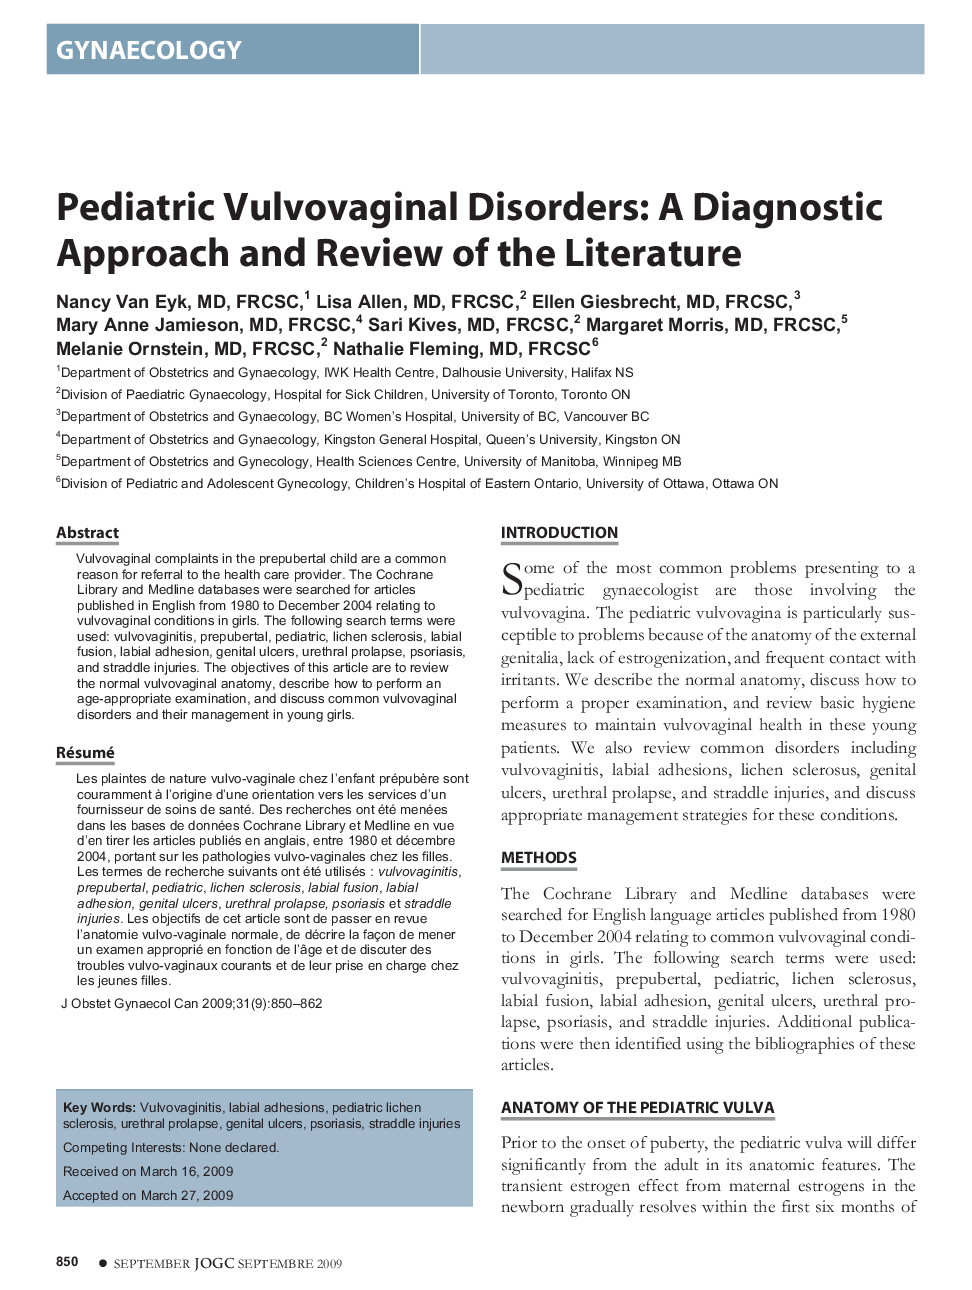 Pediatric Vulvovaginal Disorders: A Diagnostic Approach and Review of the Literature